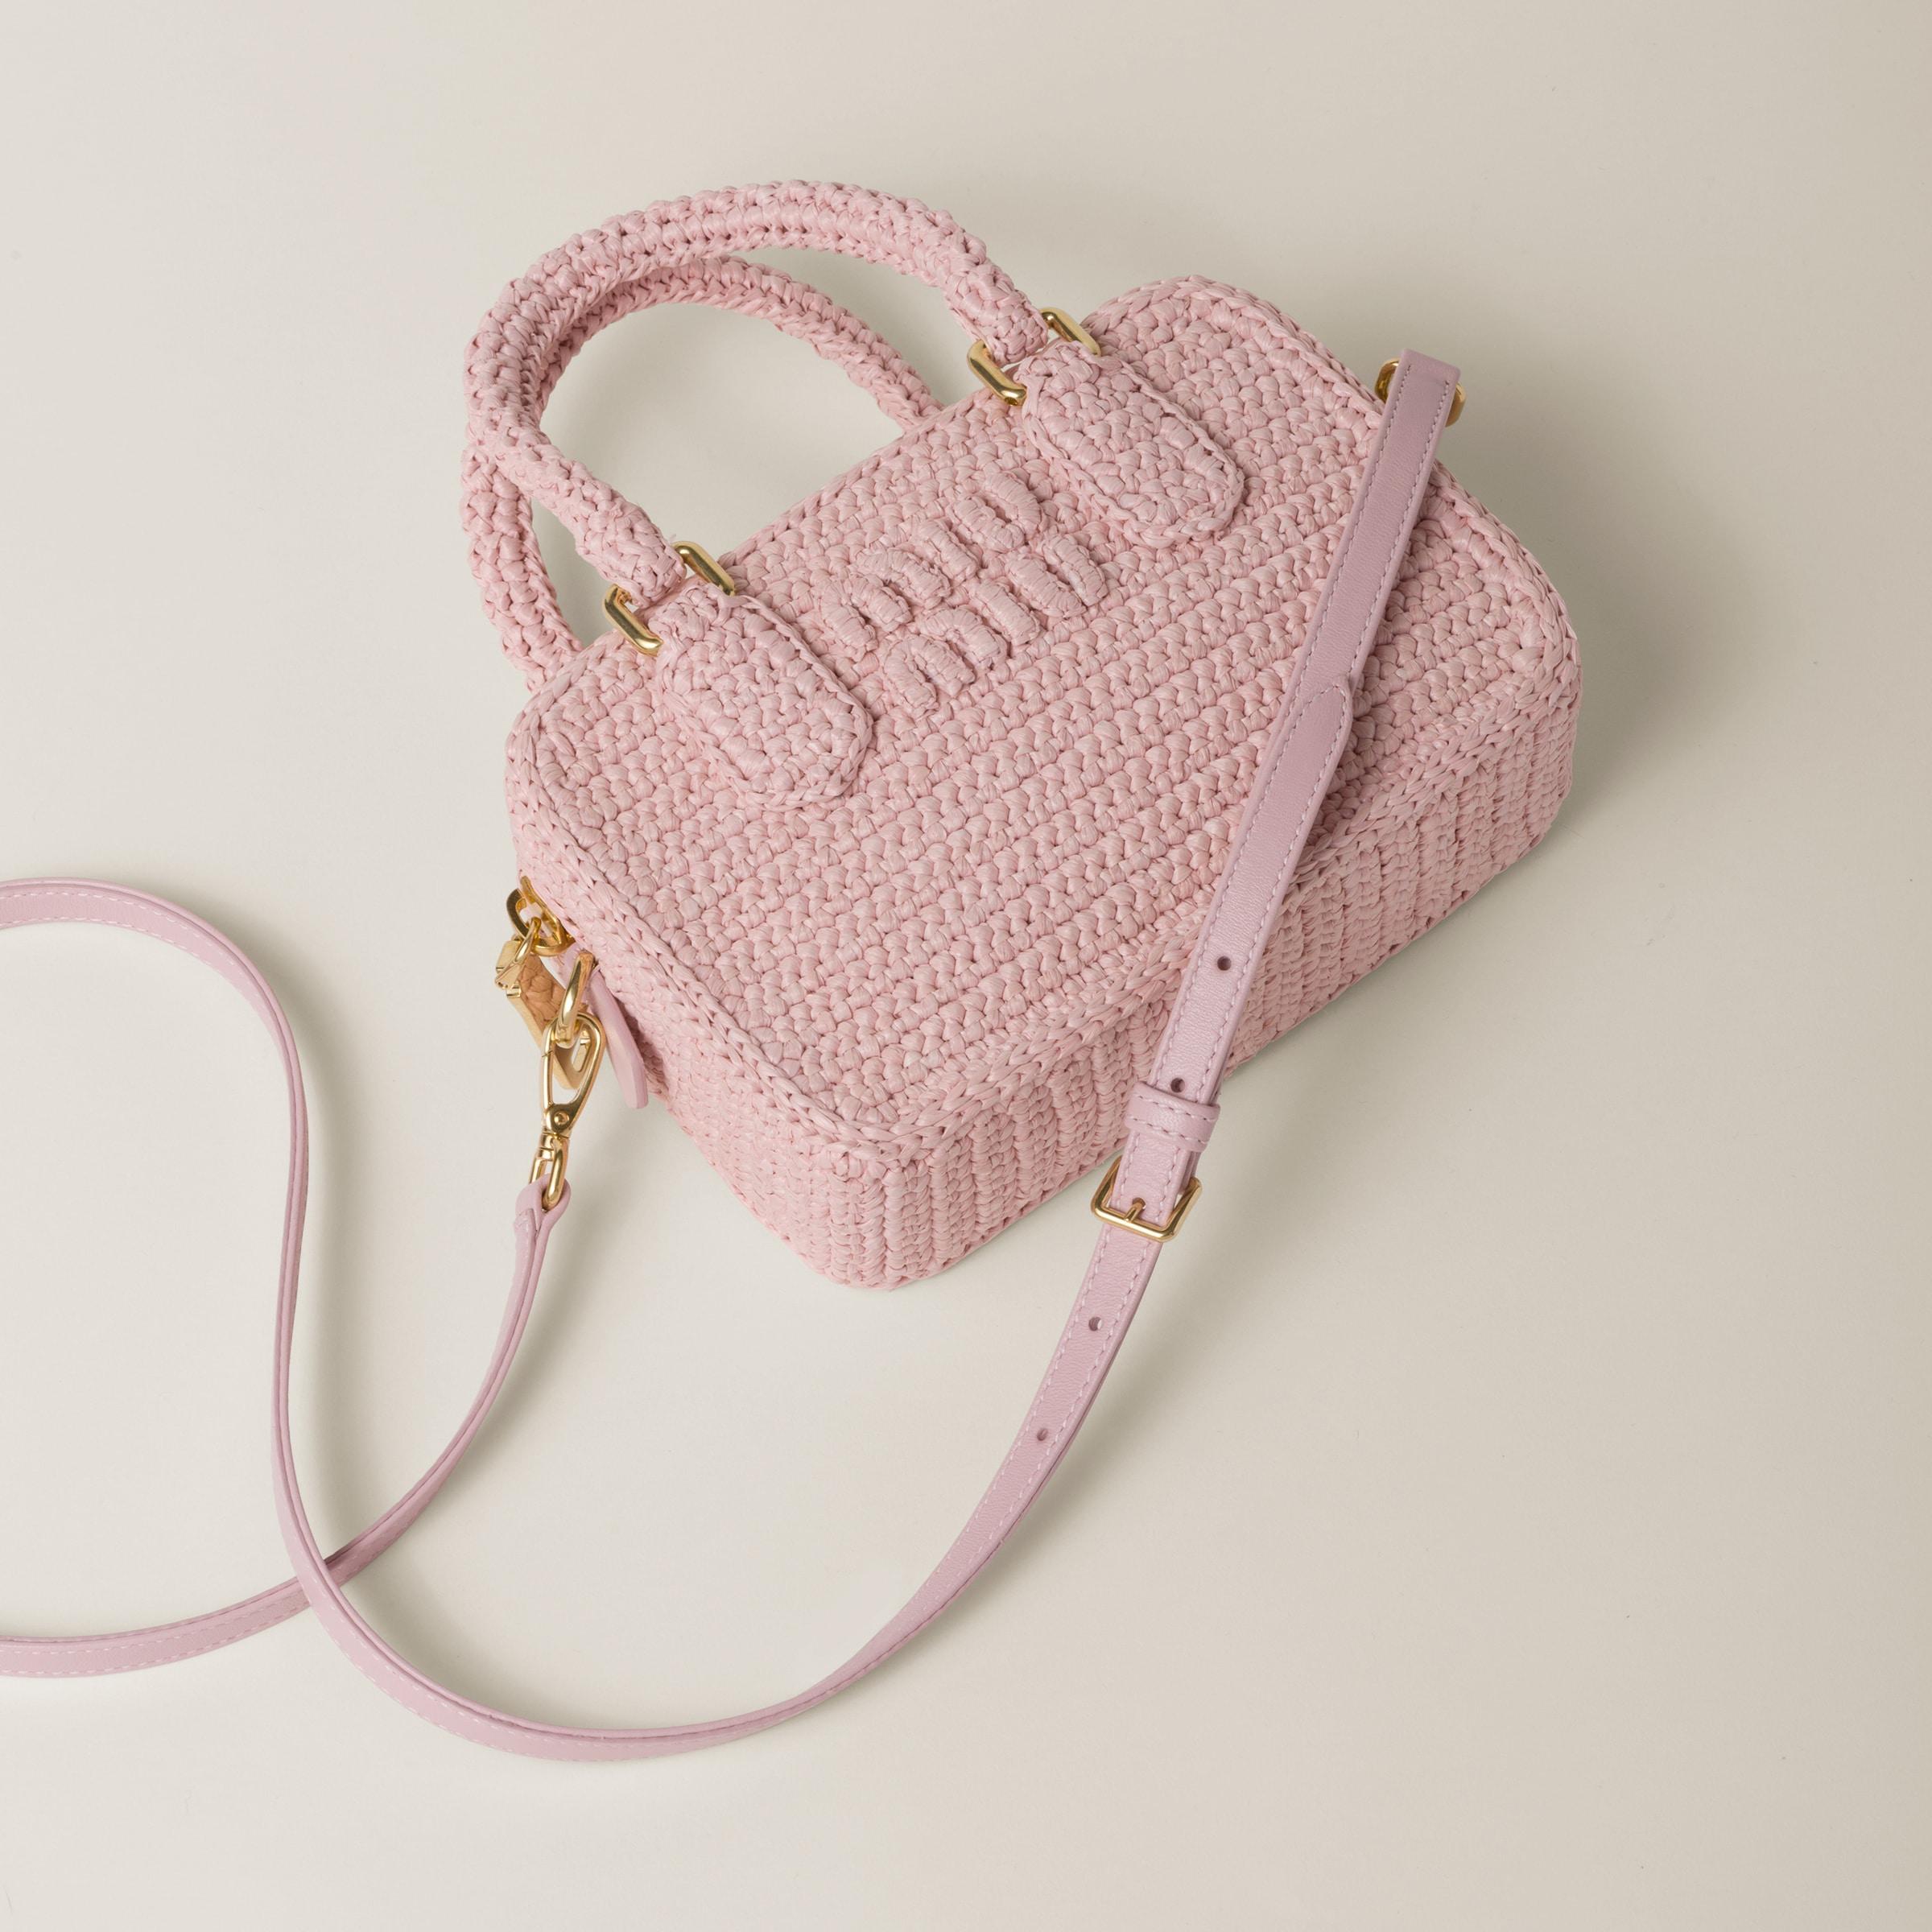 Alabaster Pink Small Crochet Tote Bag